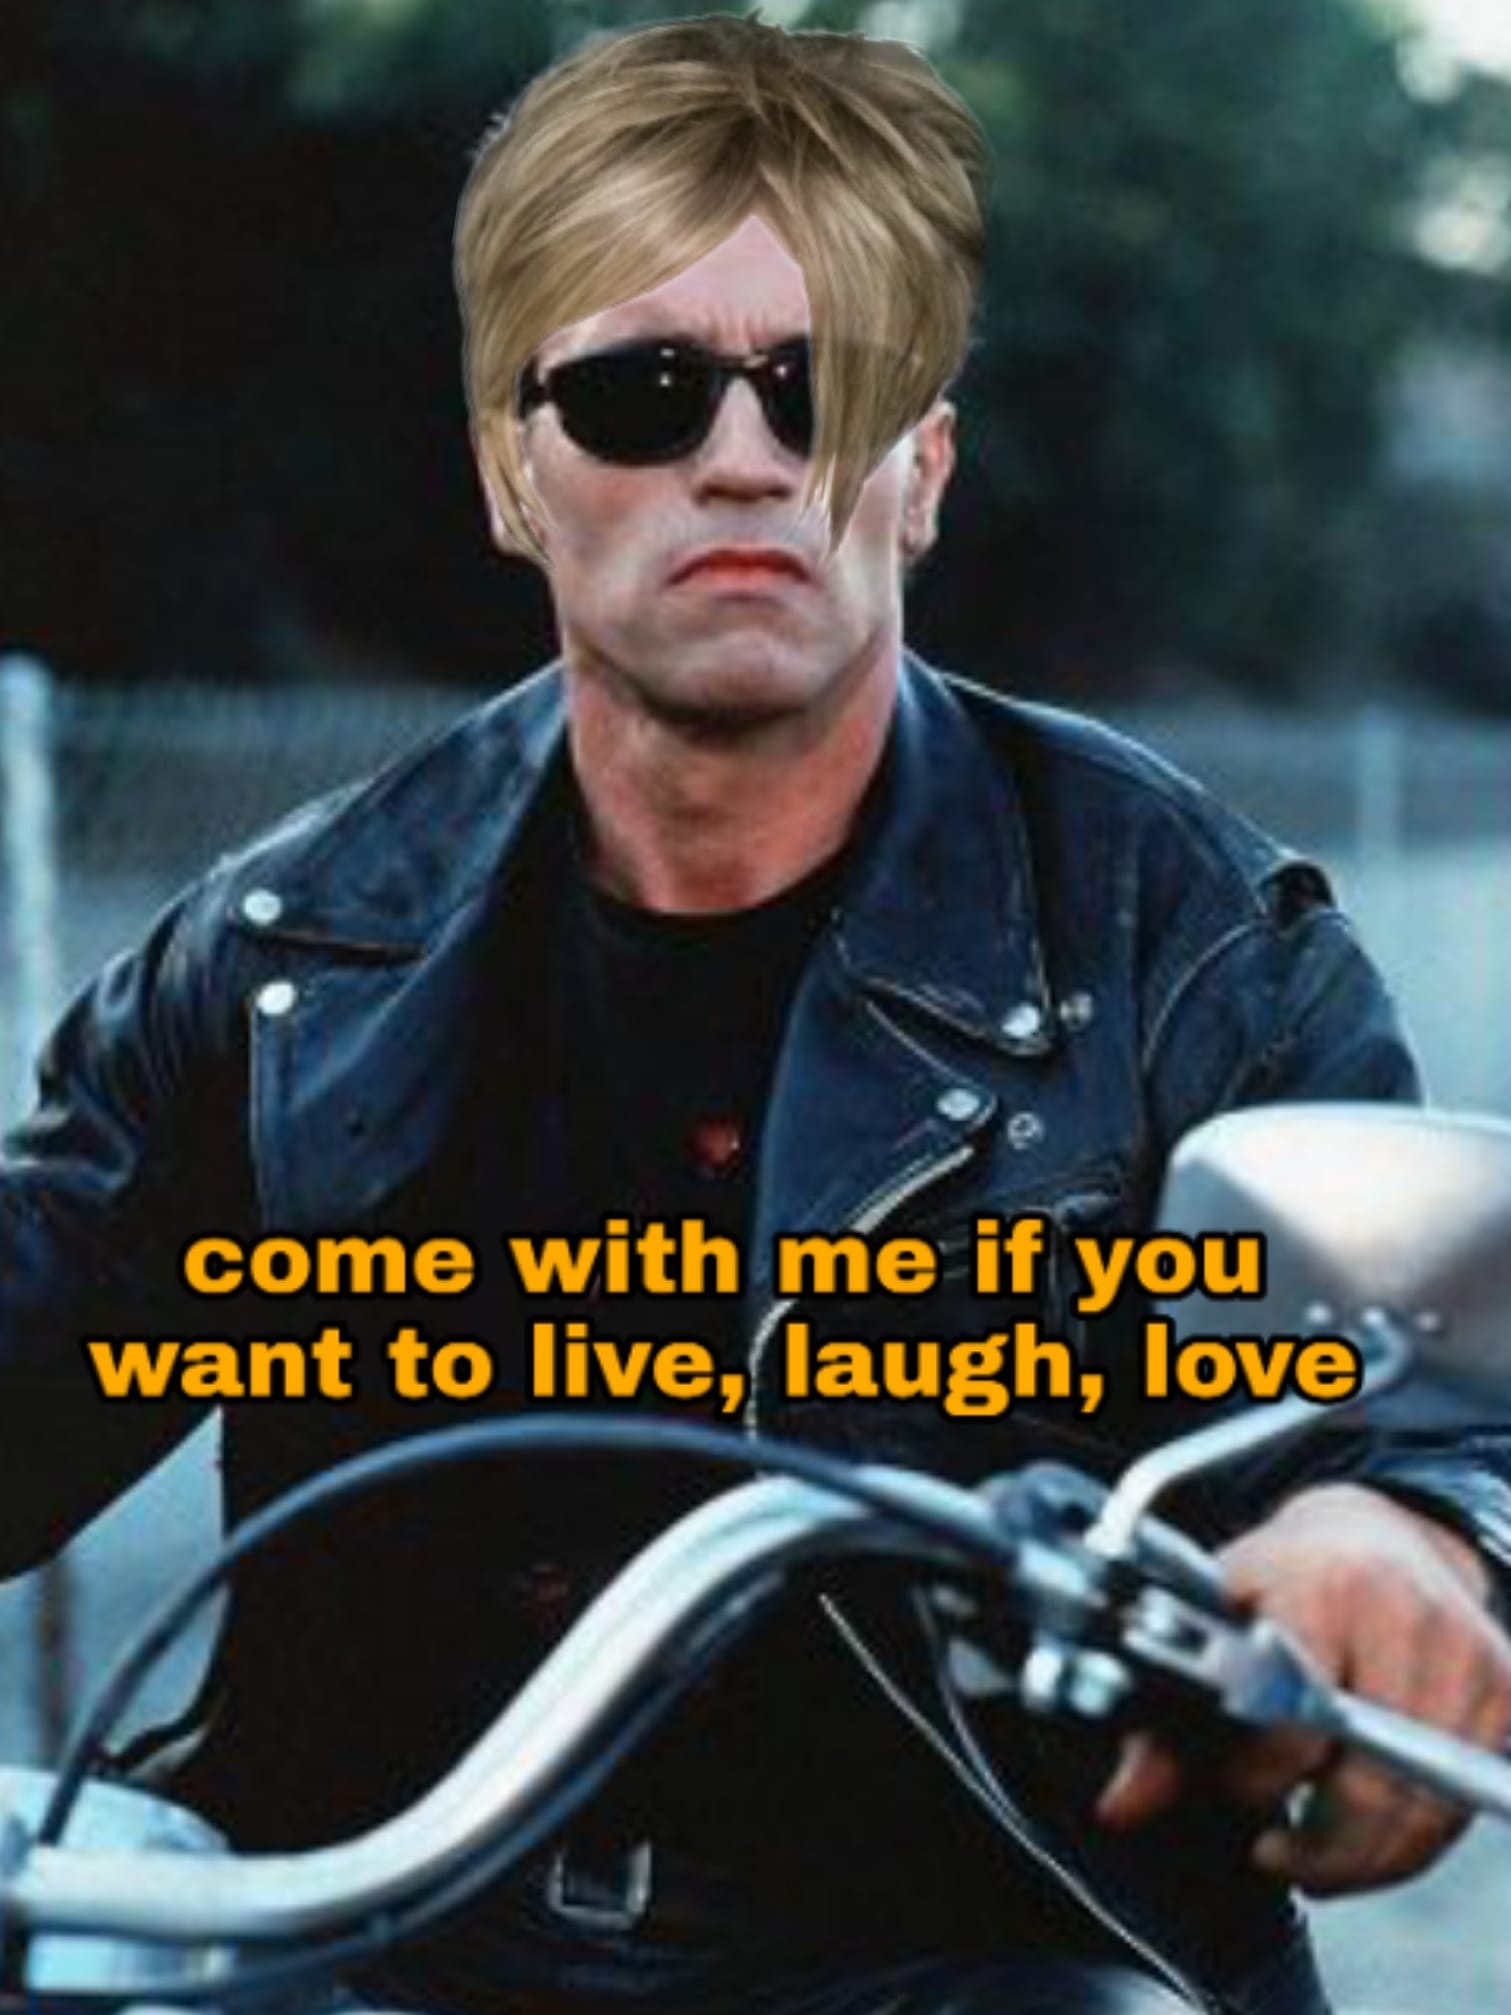 arnold schwarzenegger in terminator 2 - come with me if you want to live, laugh, love